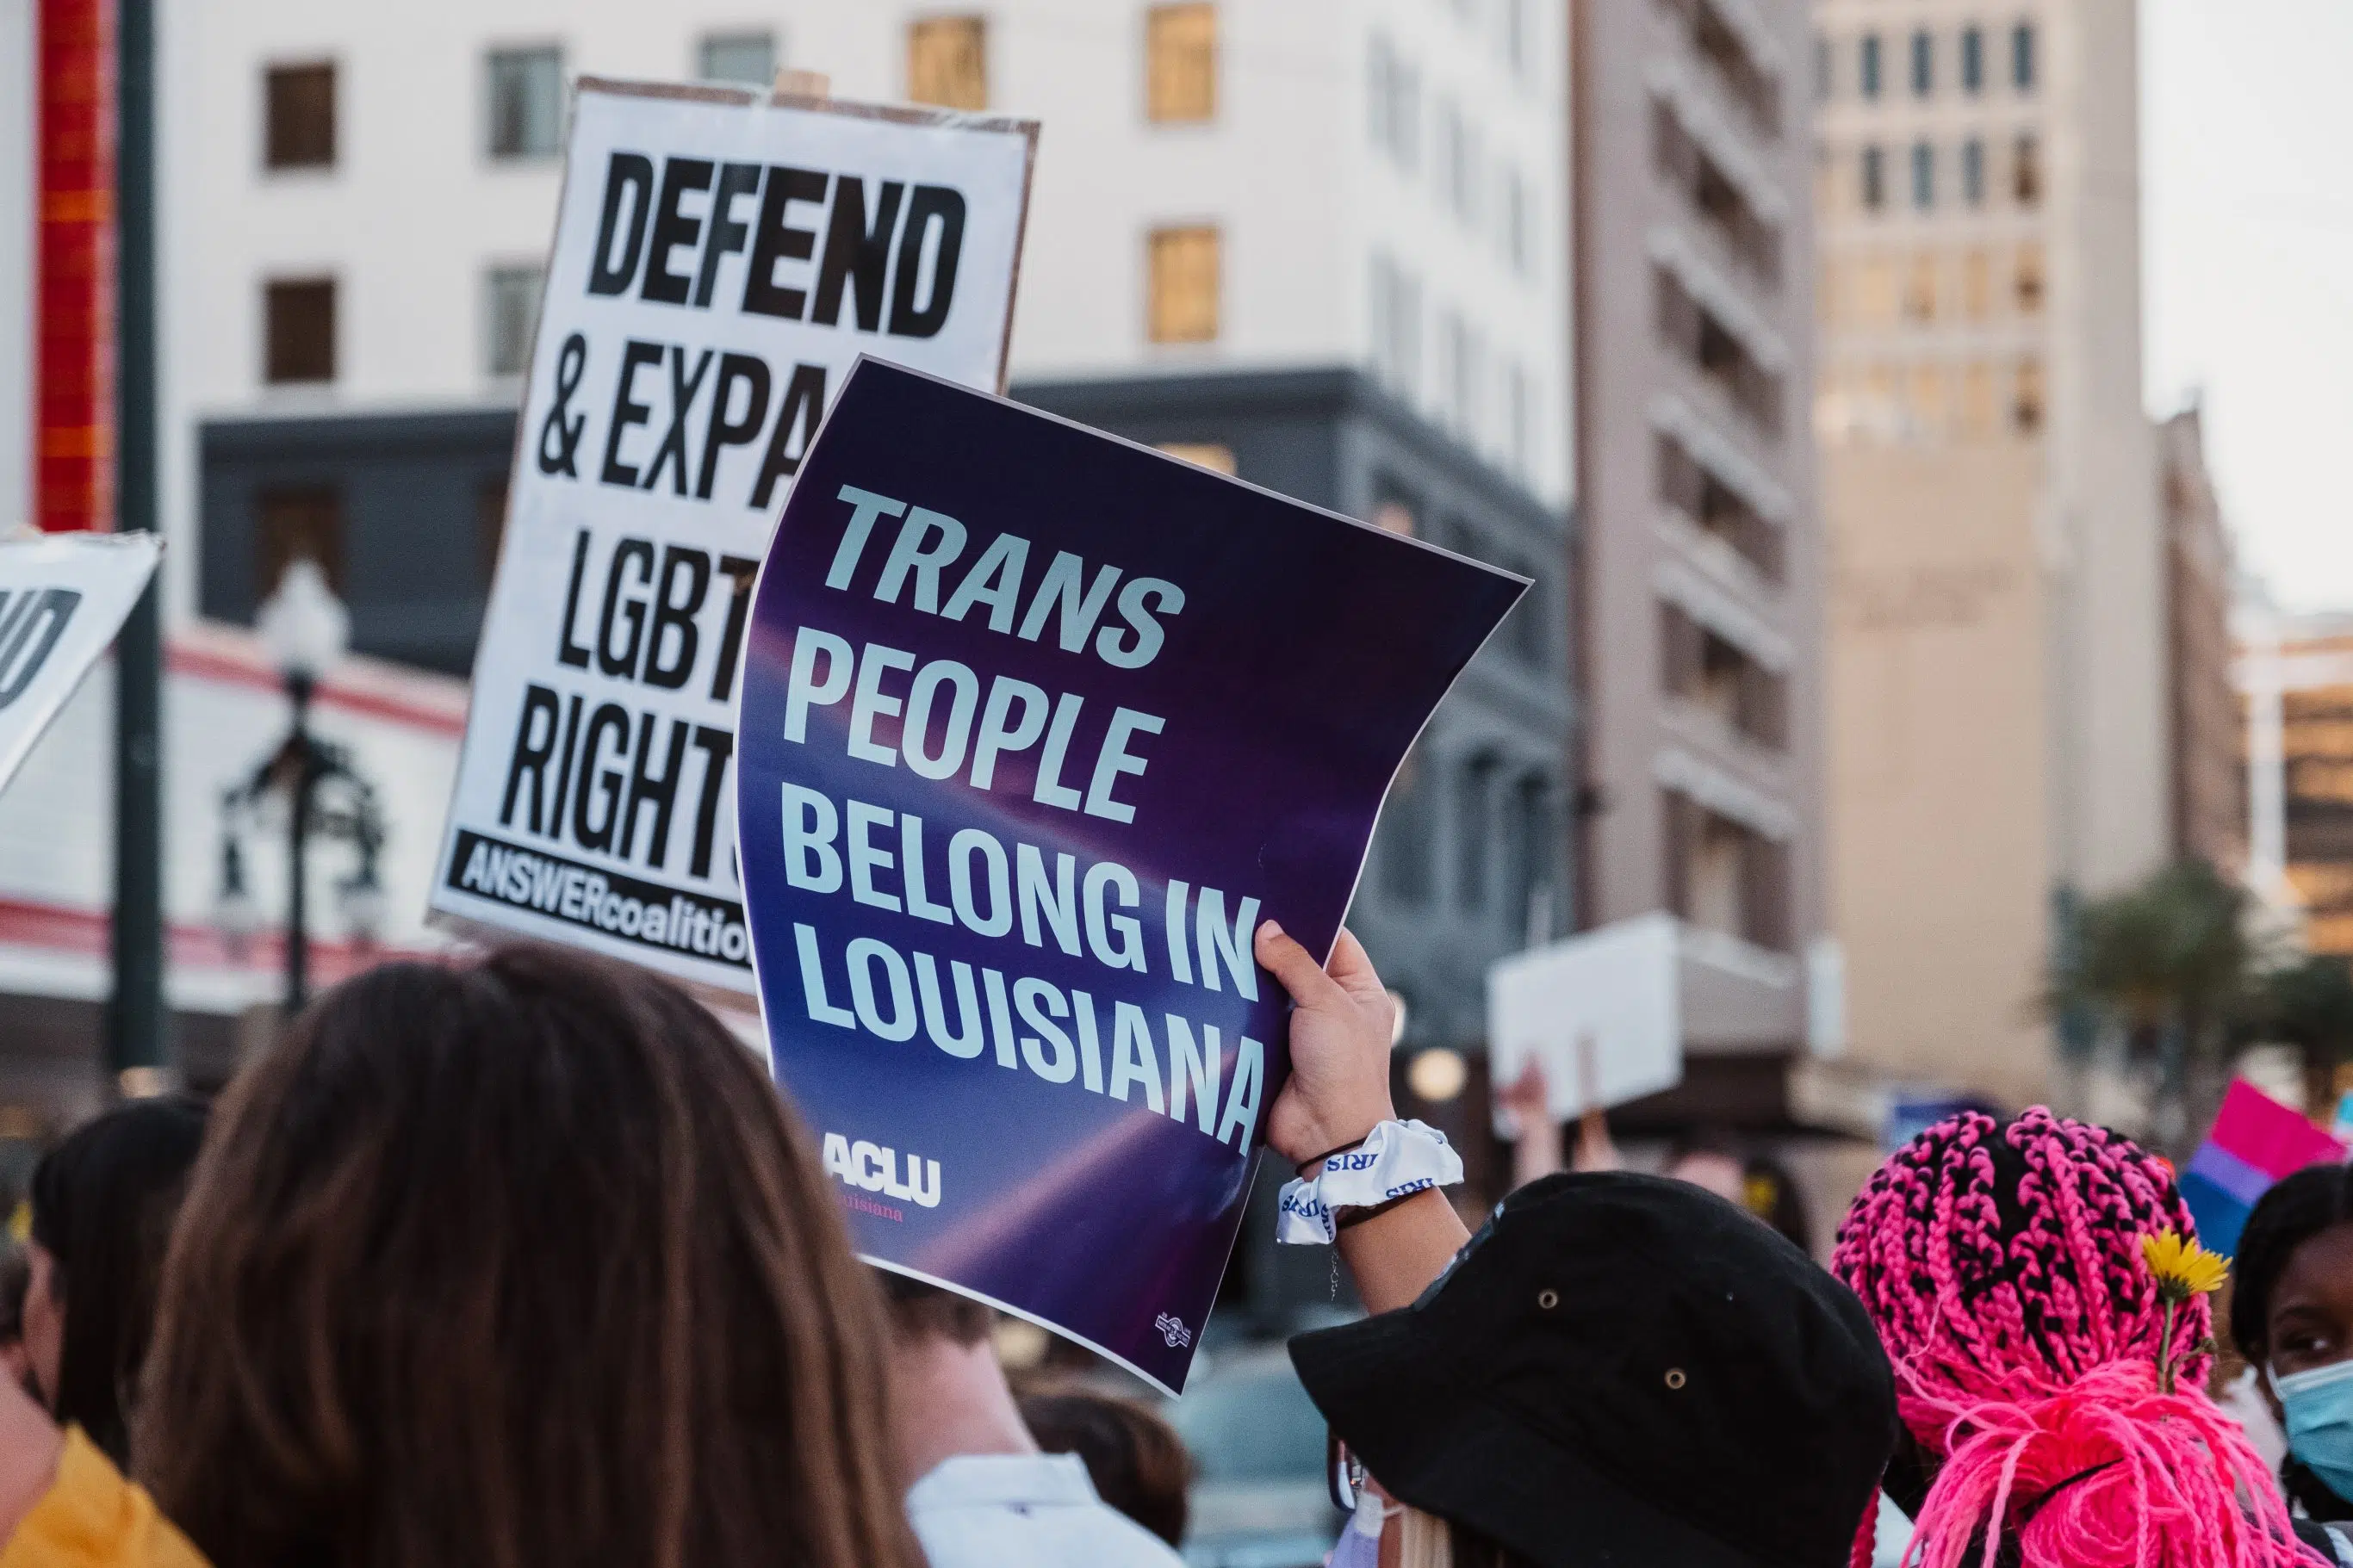 Louisiana's version of "Don't say gay bill" passes in the House